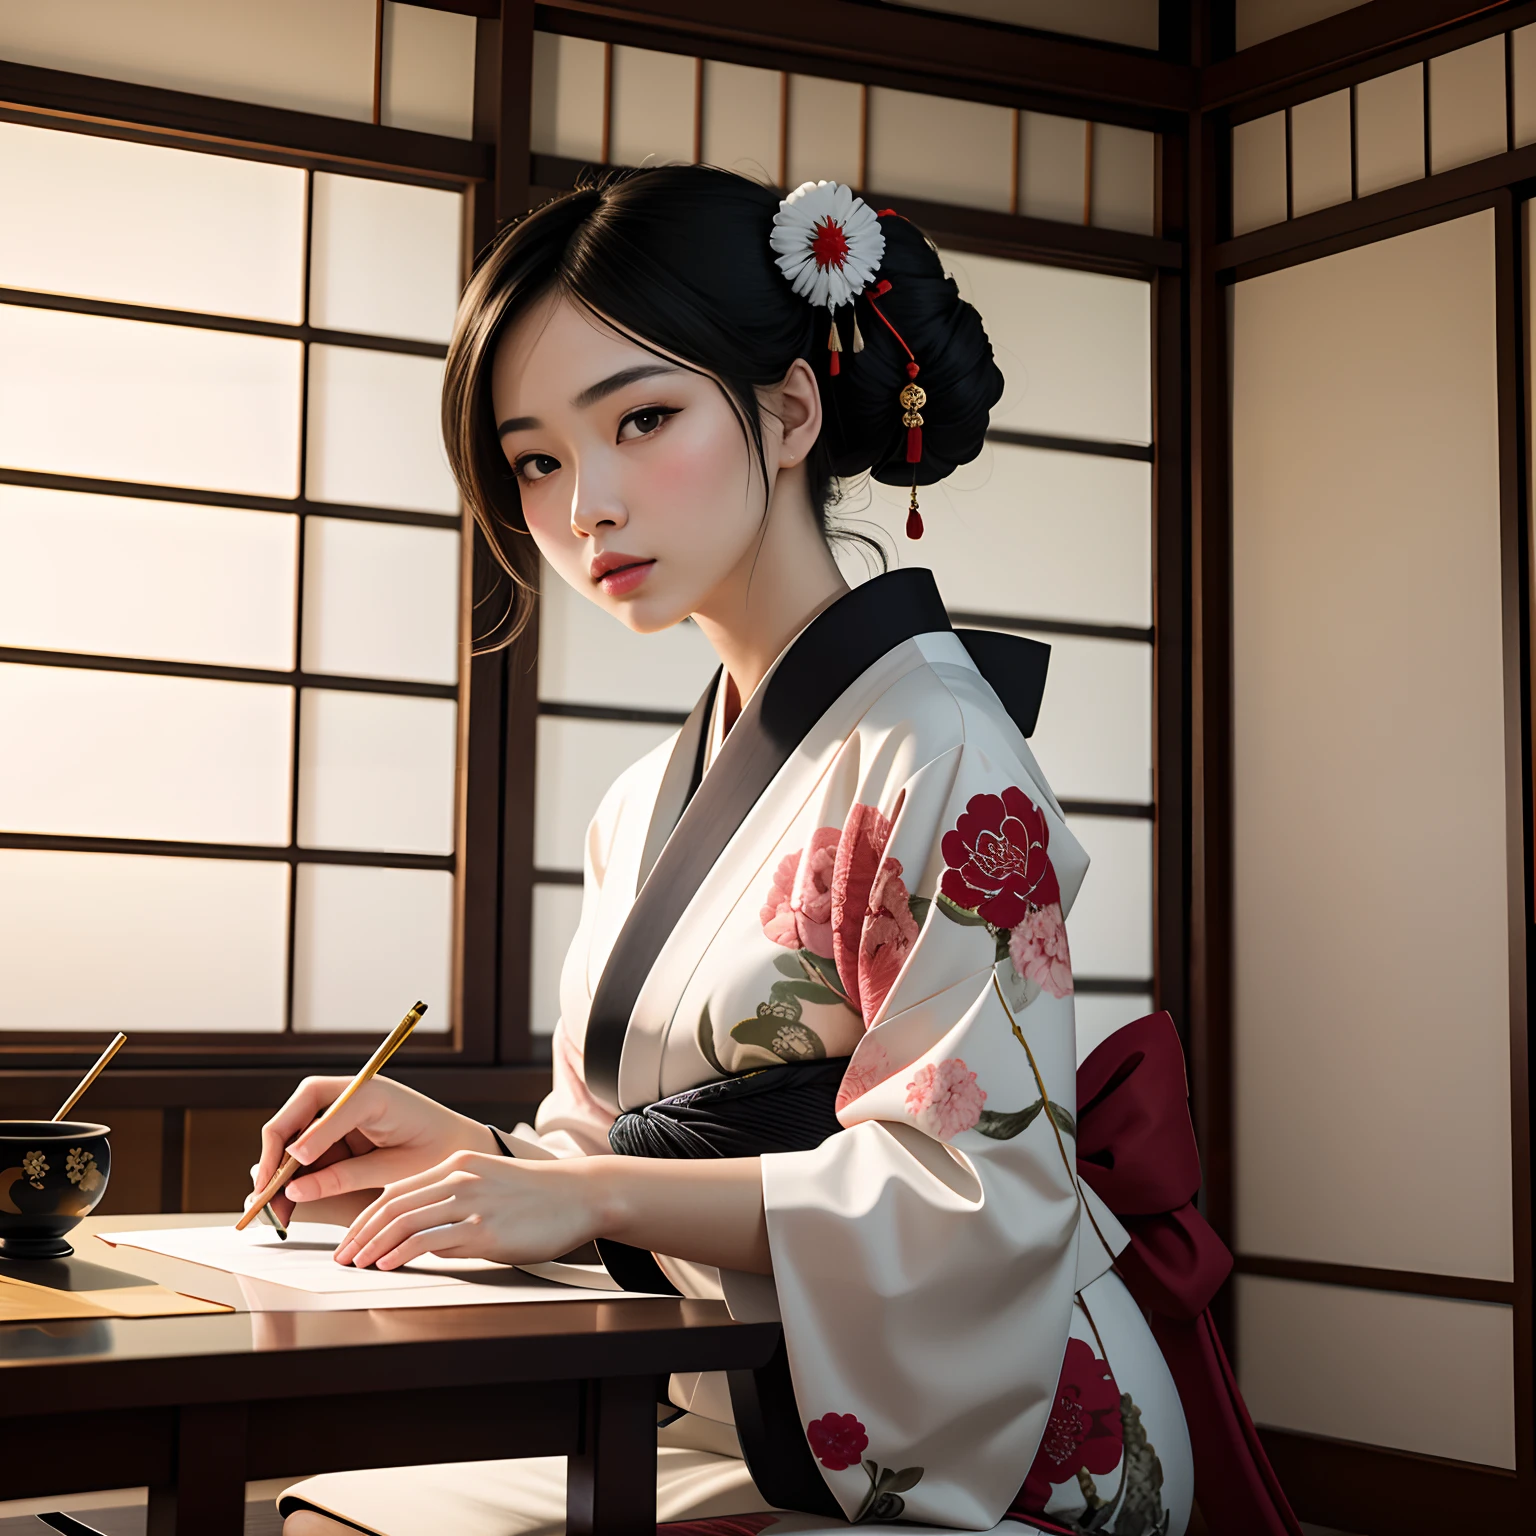 ((Masterpiece, best quality, photo realistic)), A 21-year-old incredibly beautiful woman wearing traditional Japanese kimono, practicing calligraphy with a focused expression, writing characters on a white sheet of paper, in a tatami-matted Japanese room adorned with ikebana and hanging scrolls.